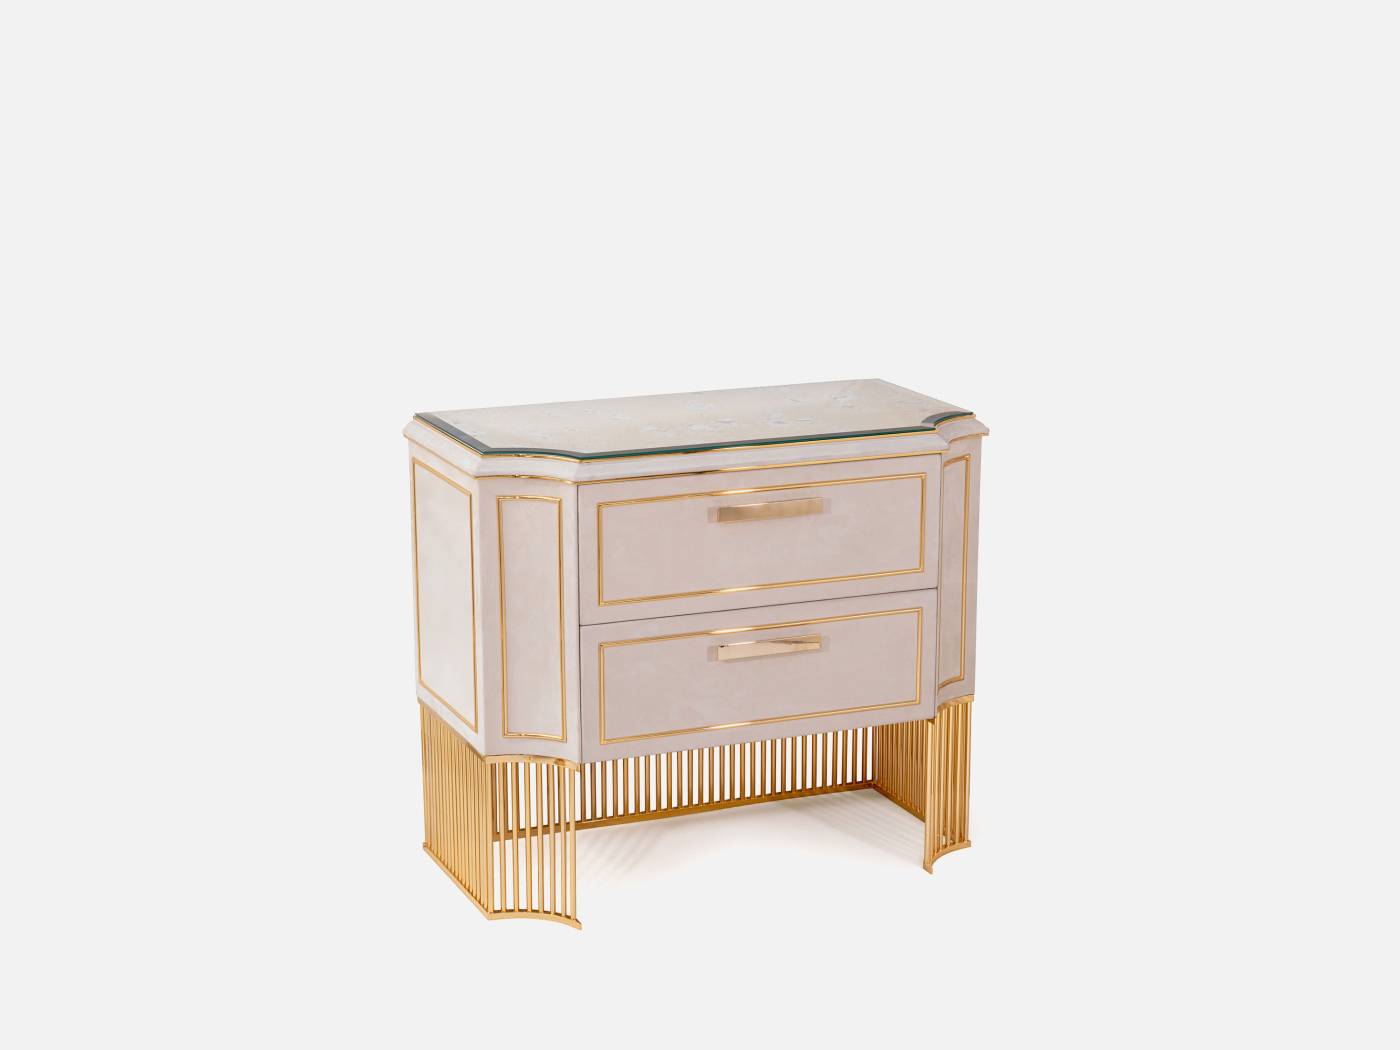 ART. 2333 - C.G. Capelletti quality furniture and timeless elegance with luxury made in italy contemporary Bedside tables.